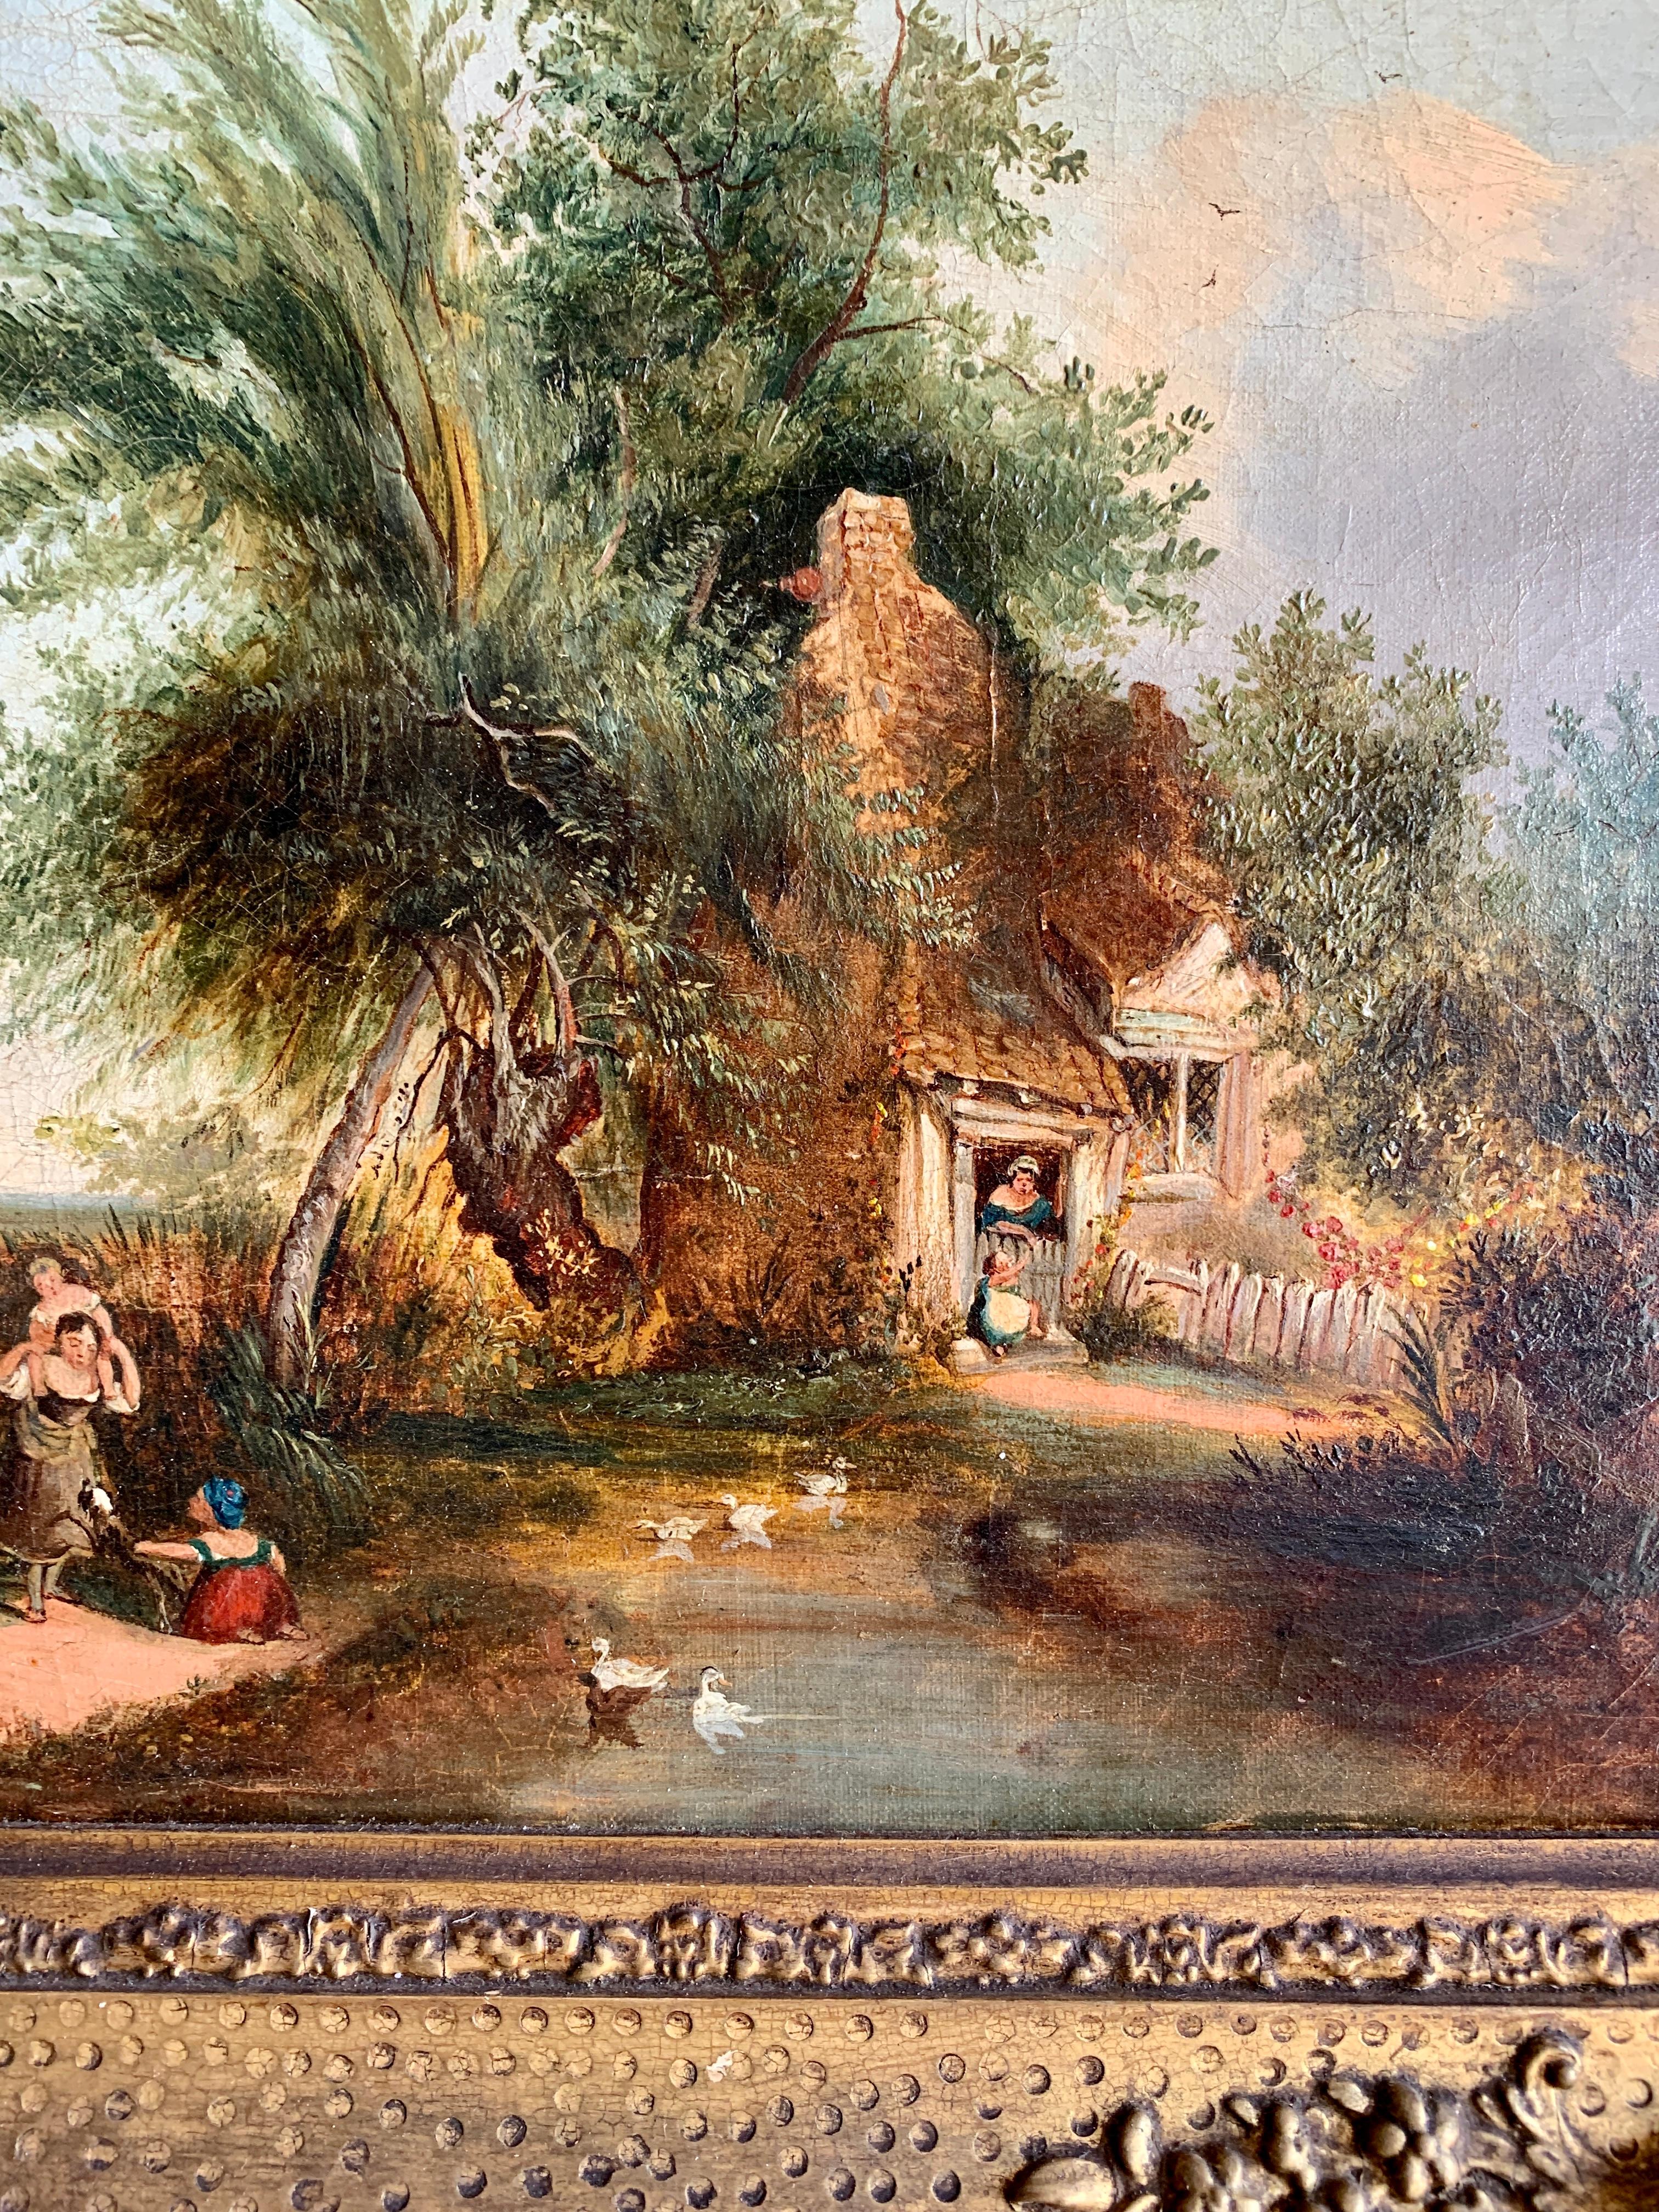 19th century English Folk Art Cottage landscape with figures playing by a pond - Painting by Unknown